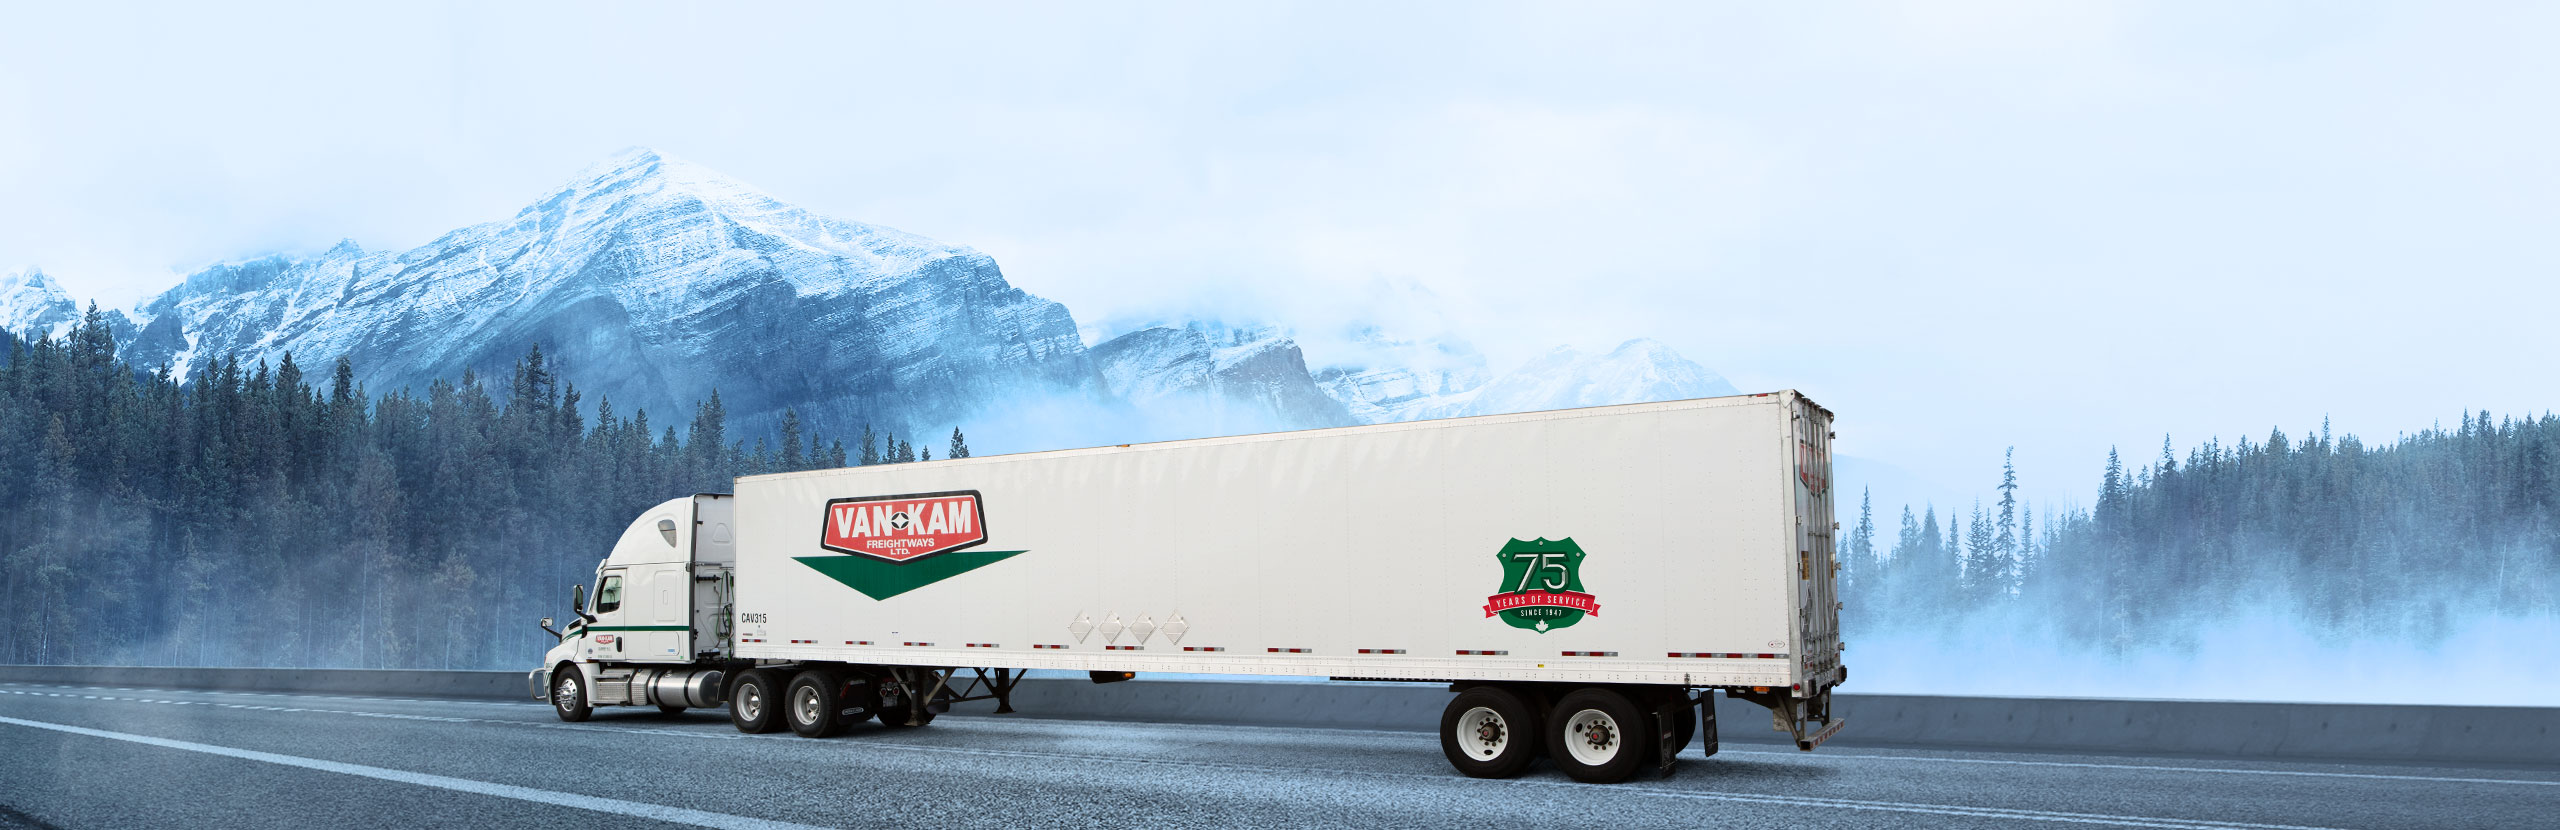 Van Kam highway truck driving in front of BC evergreen forest and snowy mountains